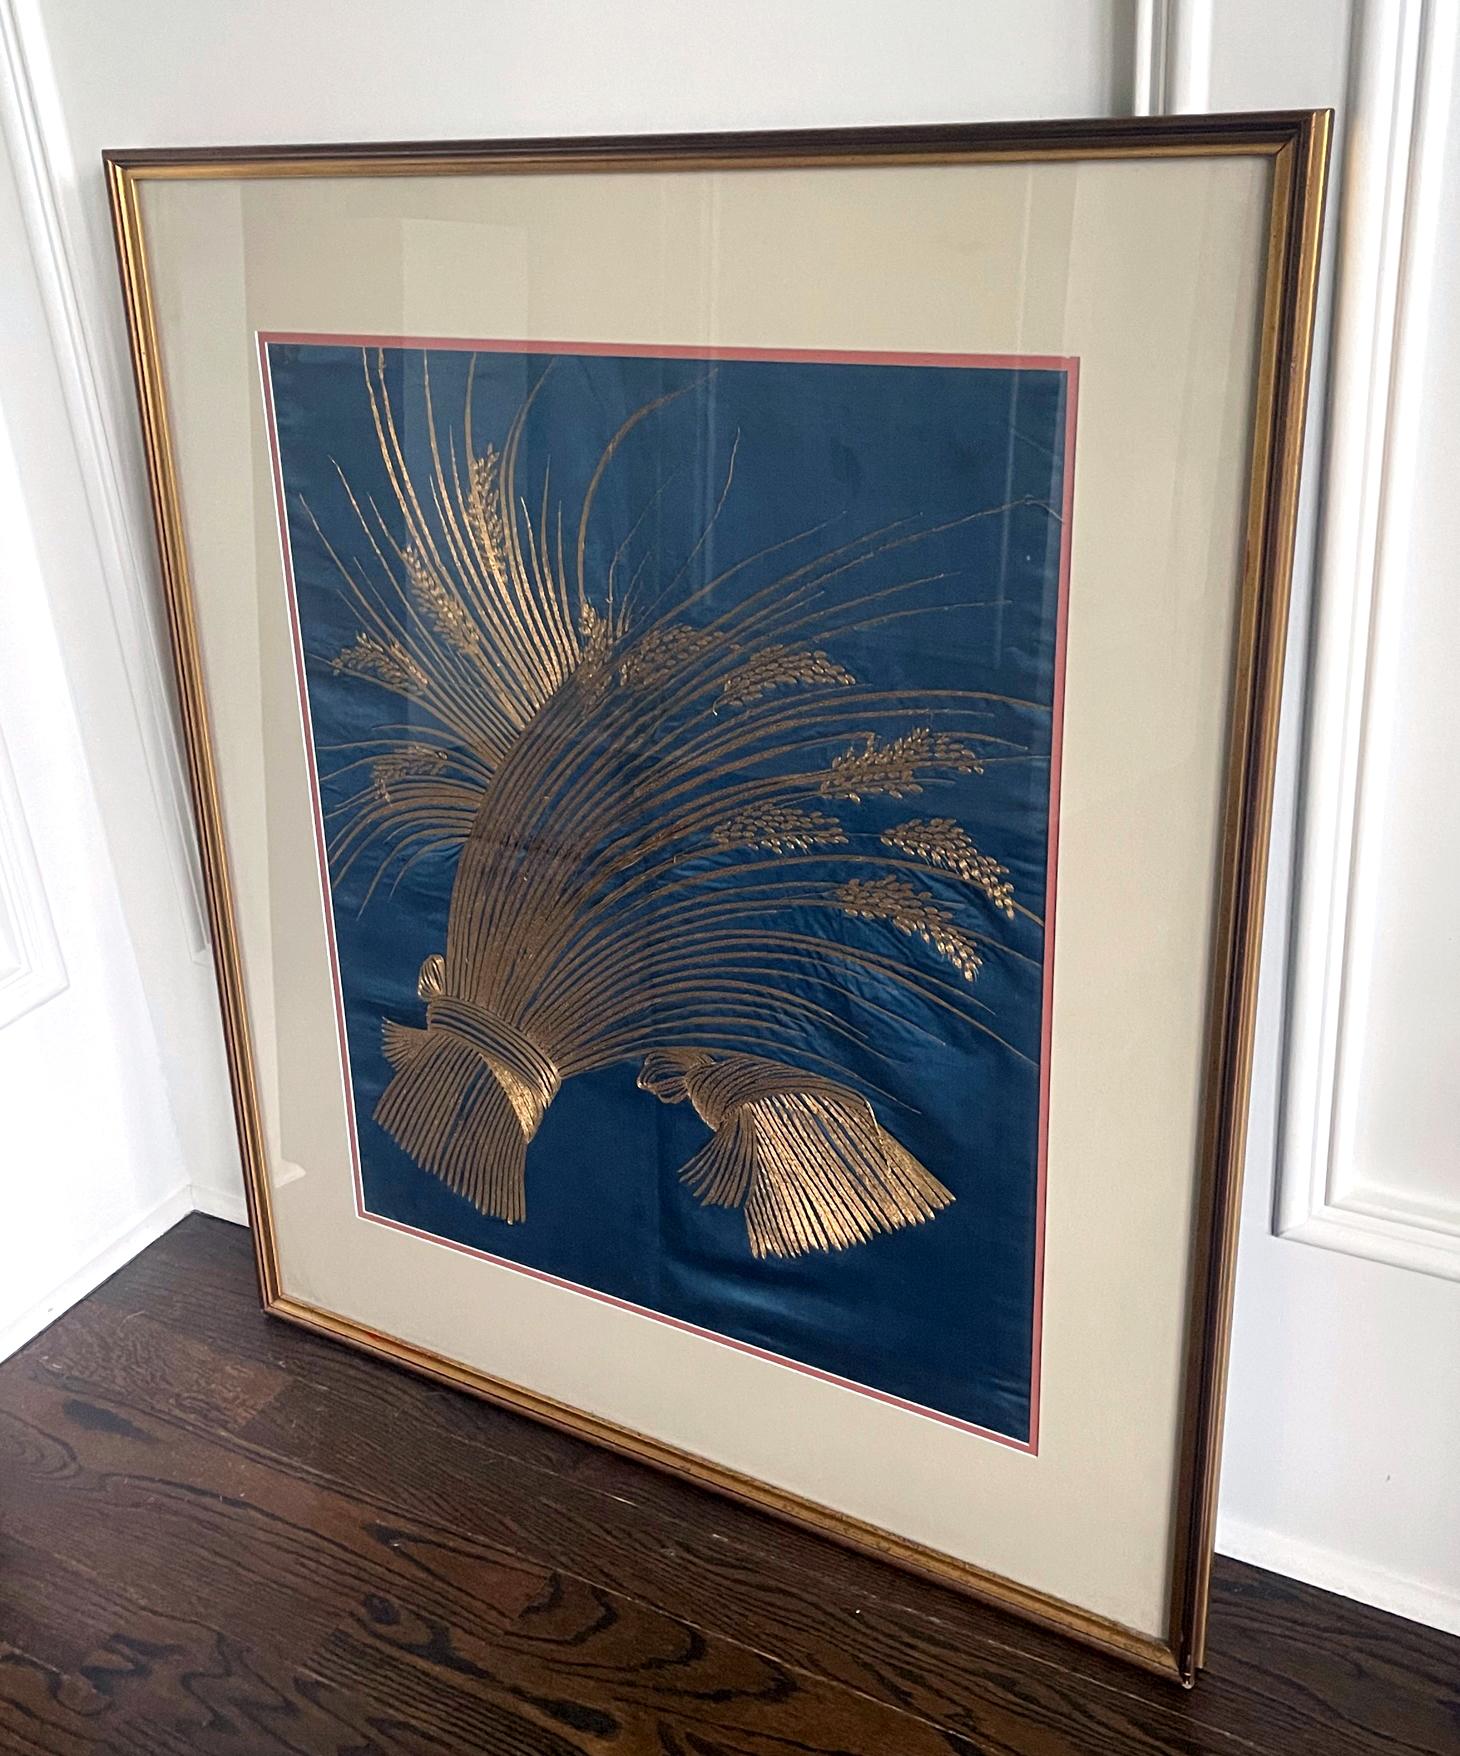 Framed Japanese Embroidery Silk Panel Meiji Period In Good Condition For Sale In Atlanta, GA